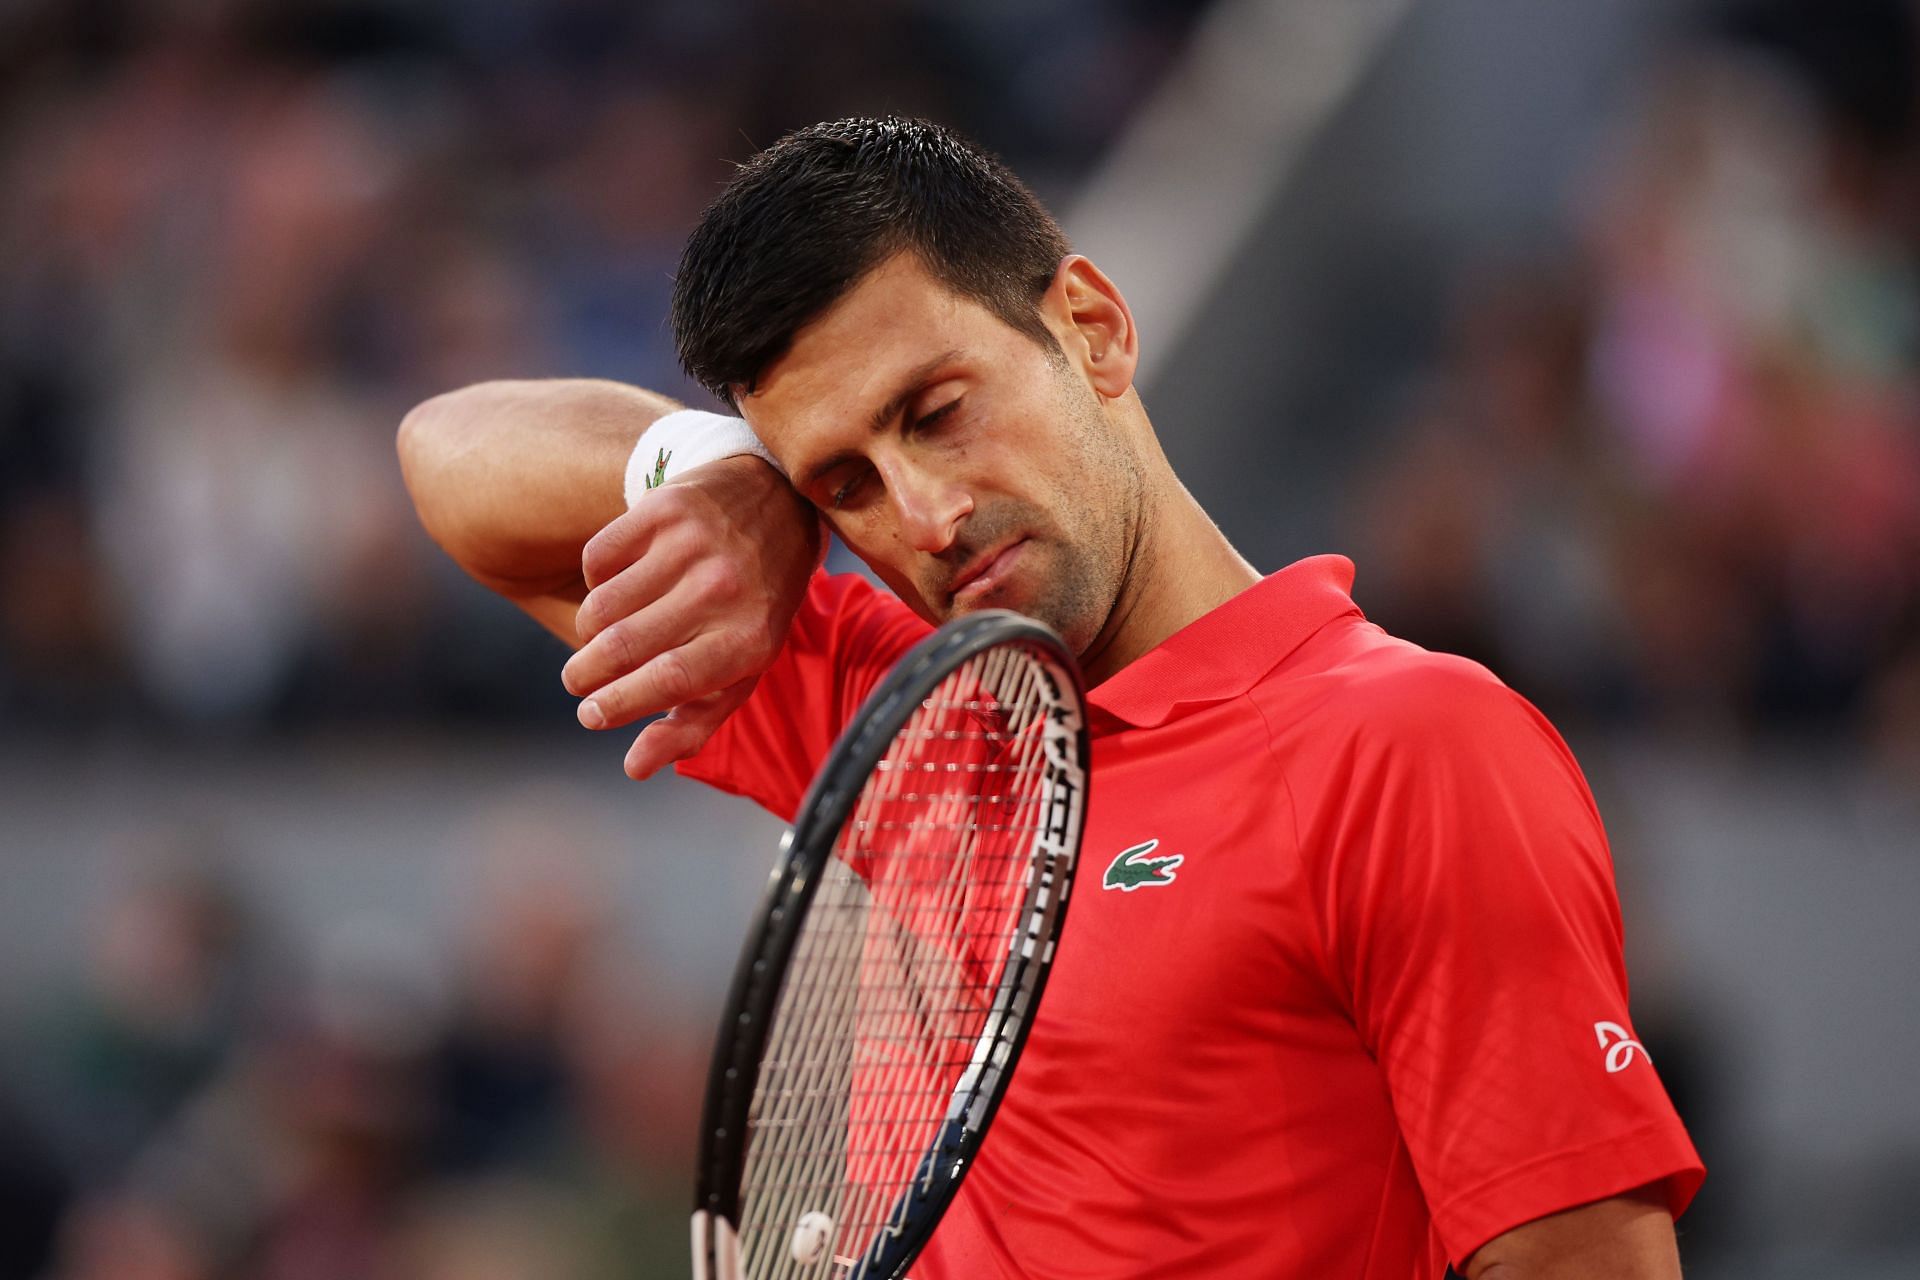 Djokovic will fall to World No. 7 irrespective of how he performs at Wimbledon